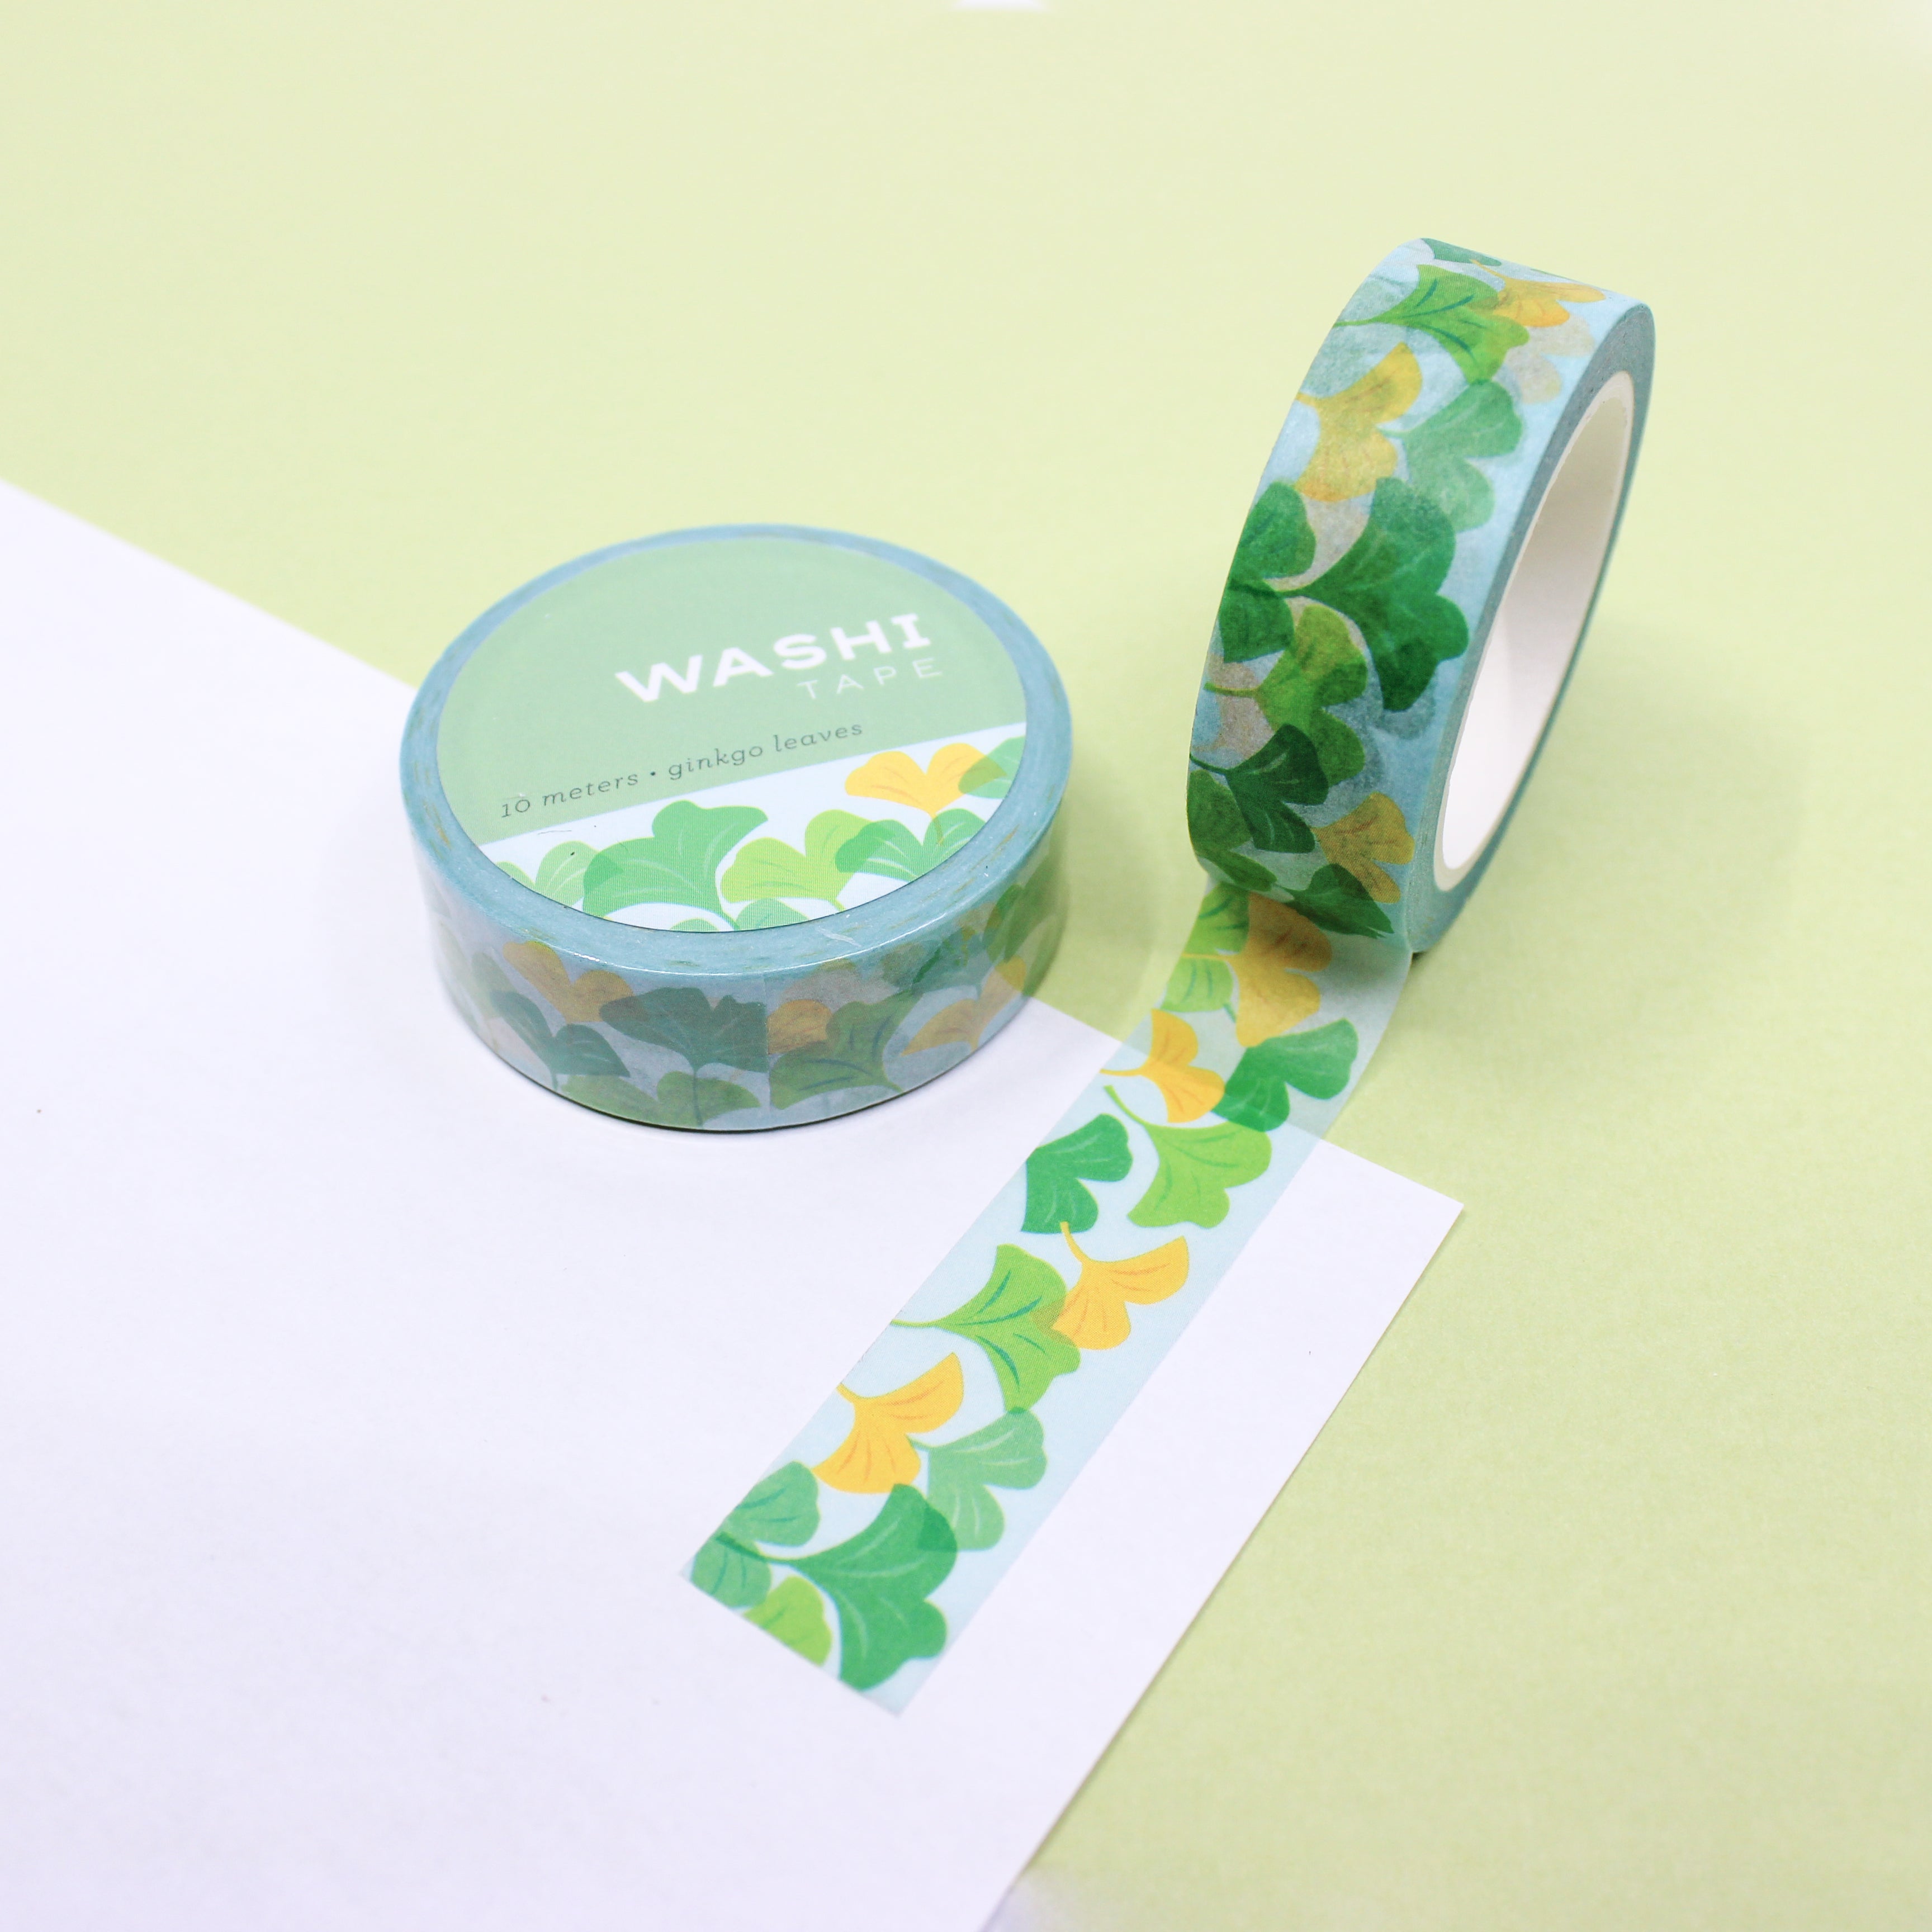 This is a ginkgo leaves themed washi tape from BBB Supplies Craft Shop